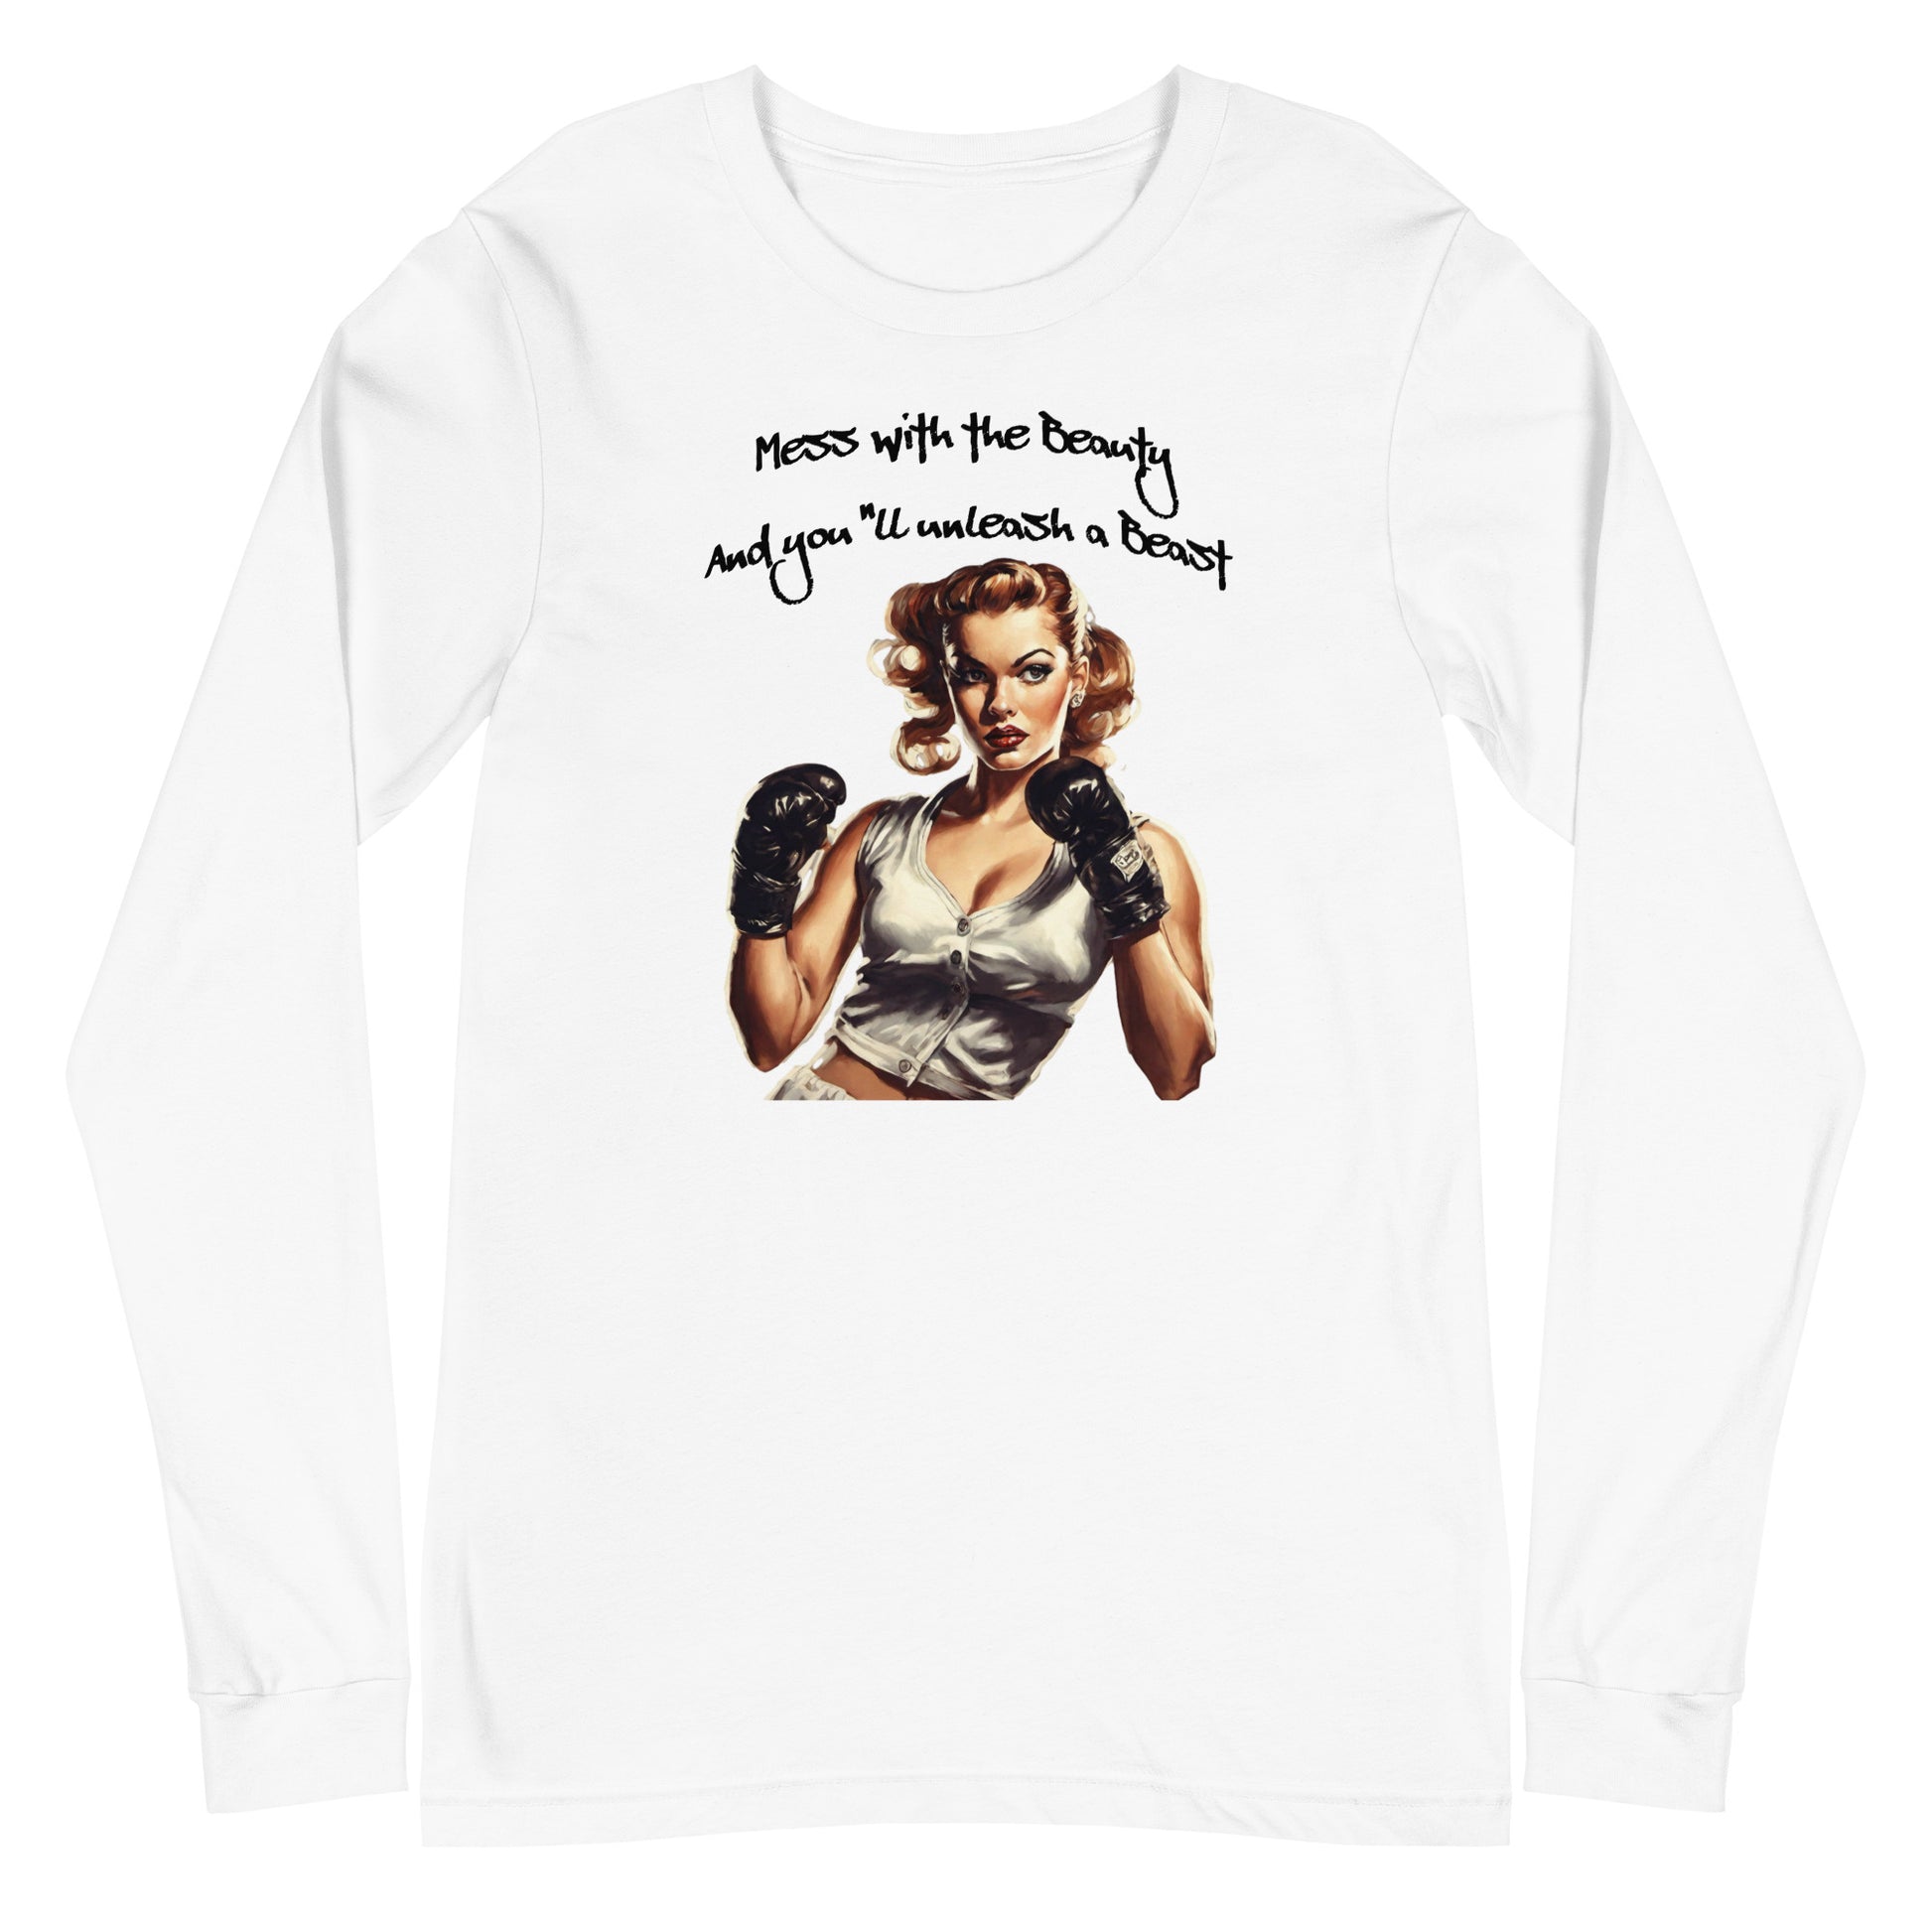 Mess with the Beauty, Unleash the Beast Women's Long Sleeve Tee White